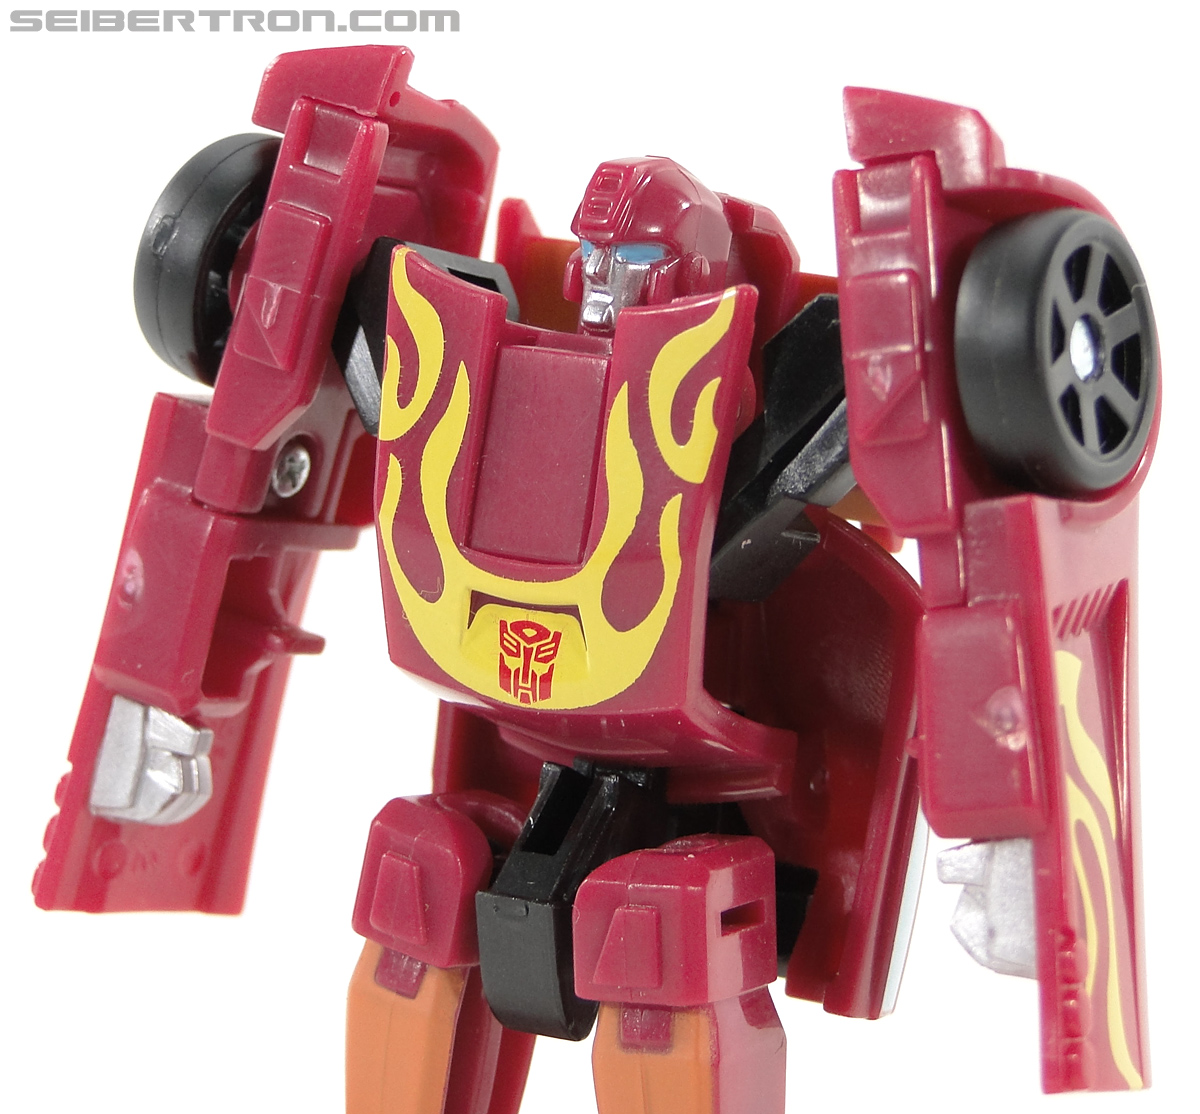 Transformers Chronicles Hot Rod (Hot Rodimus) (Image #72 of 110)